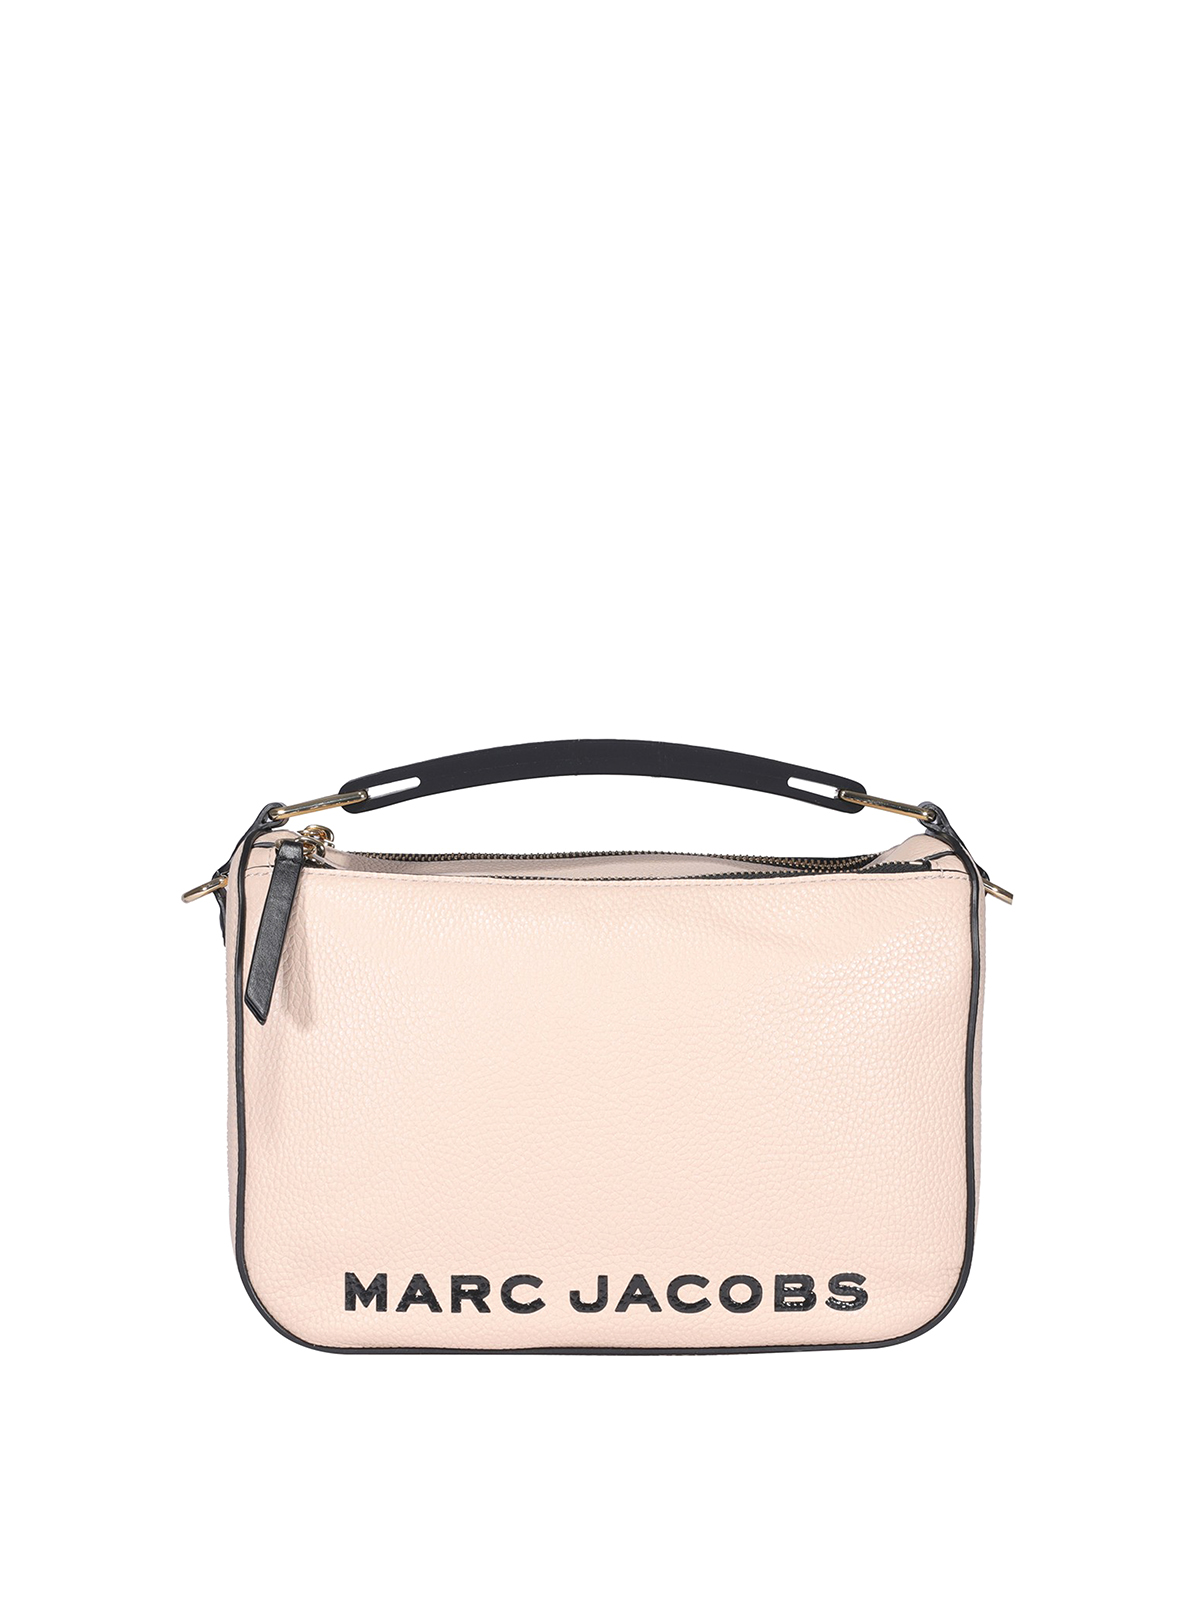 Marc Jacobs The Softbox Tote In Light Beige